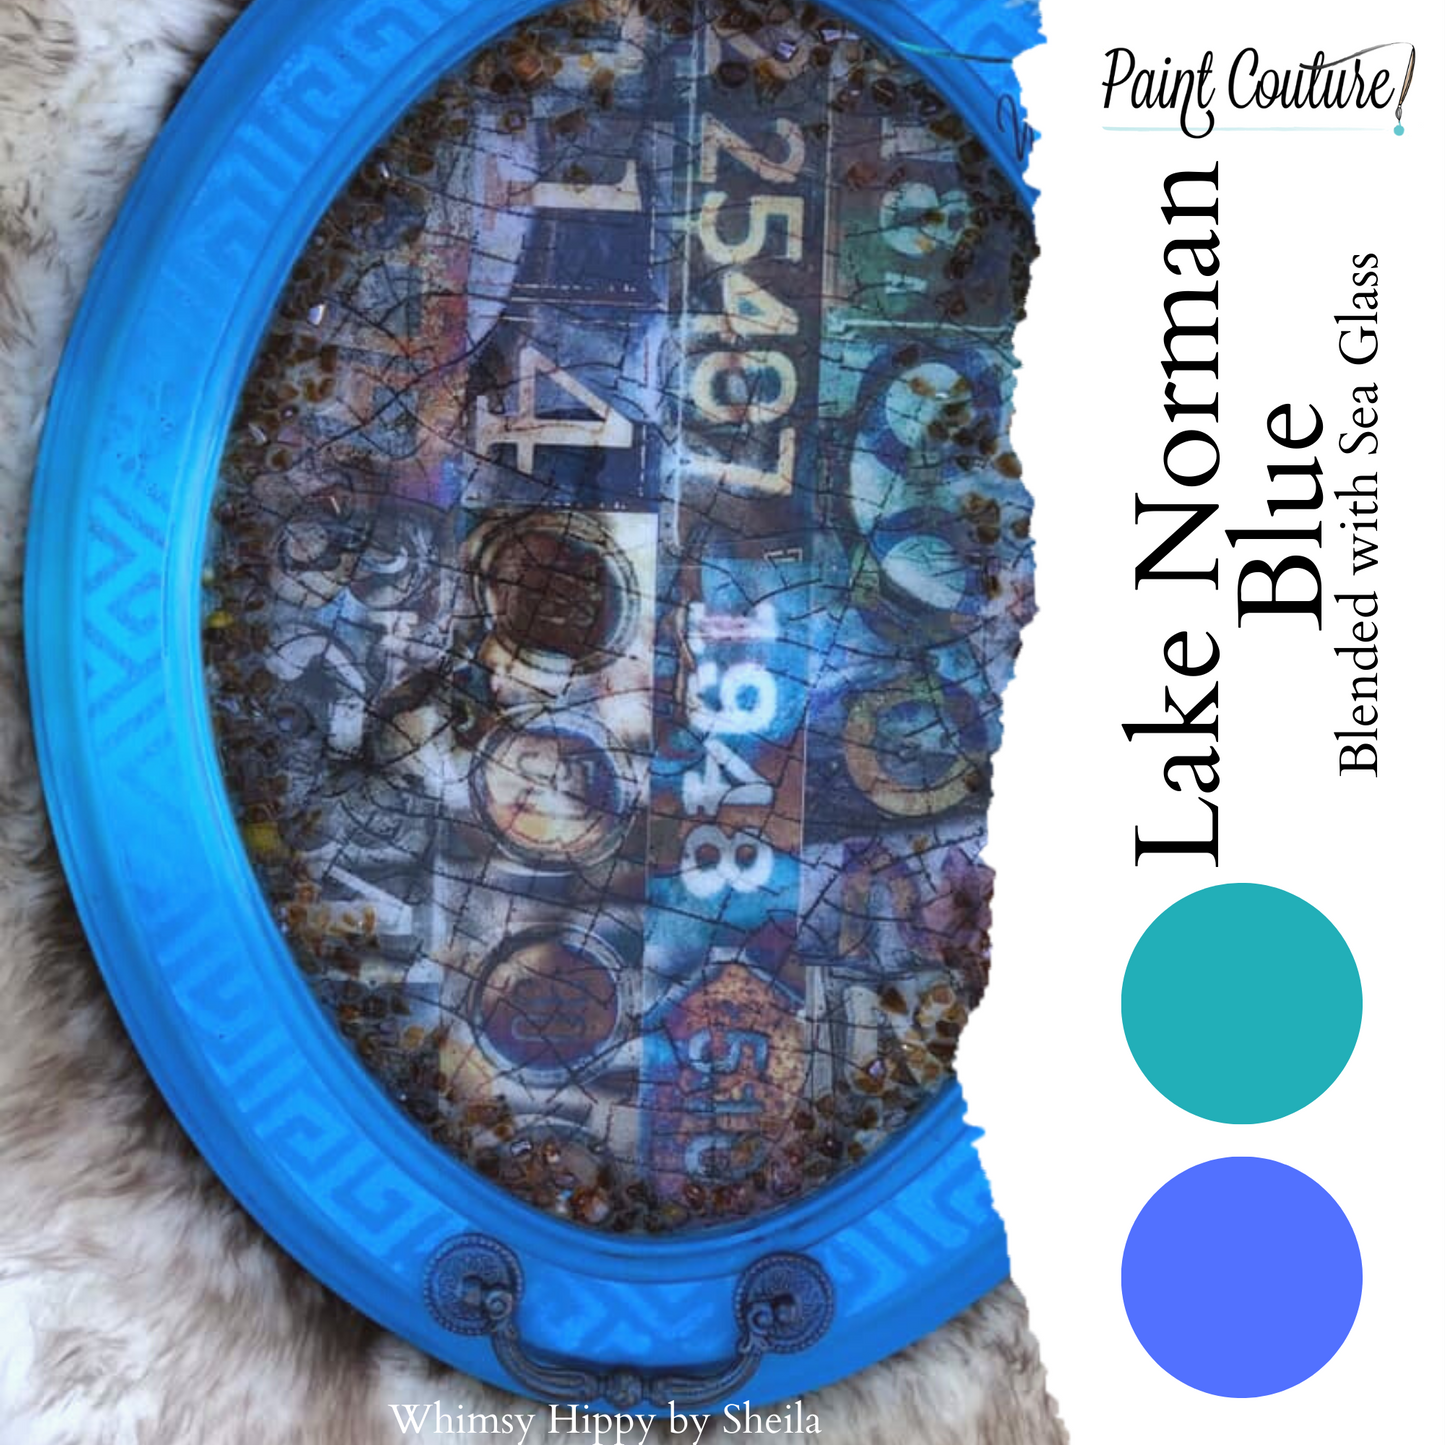 Paint Couture Lake Norman Blue